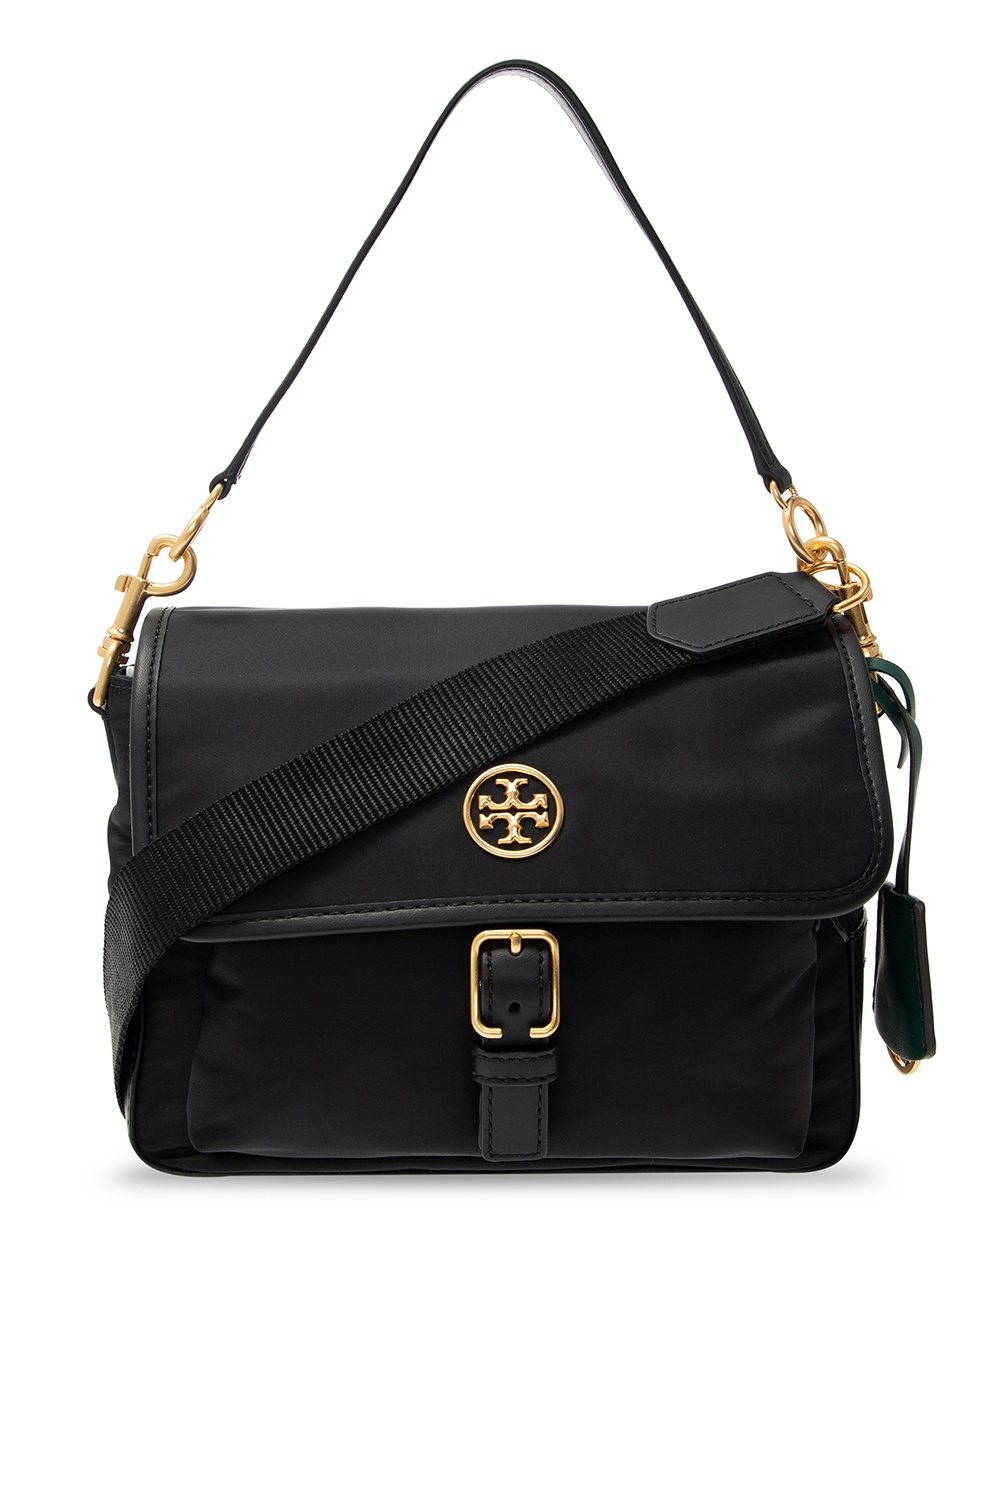 Tory Burch 'Perry Small' shoulder bag, Women's Bags